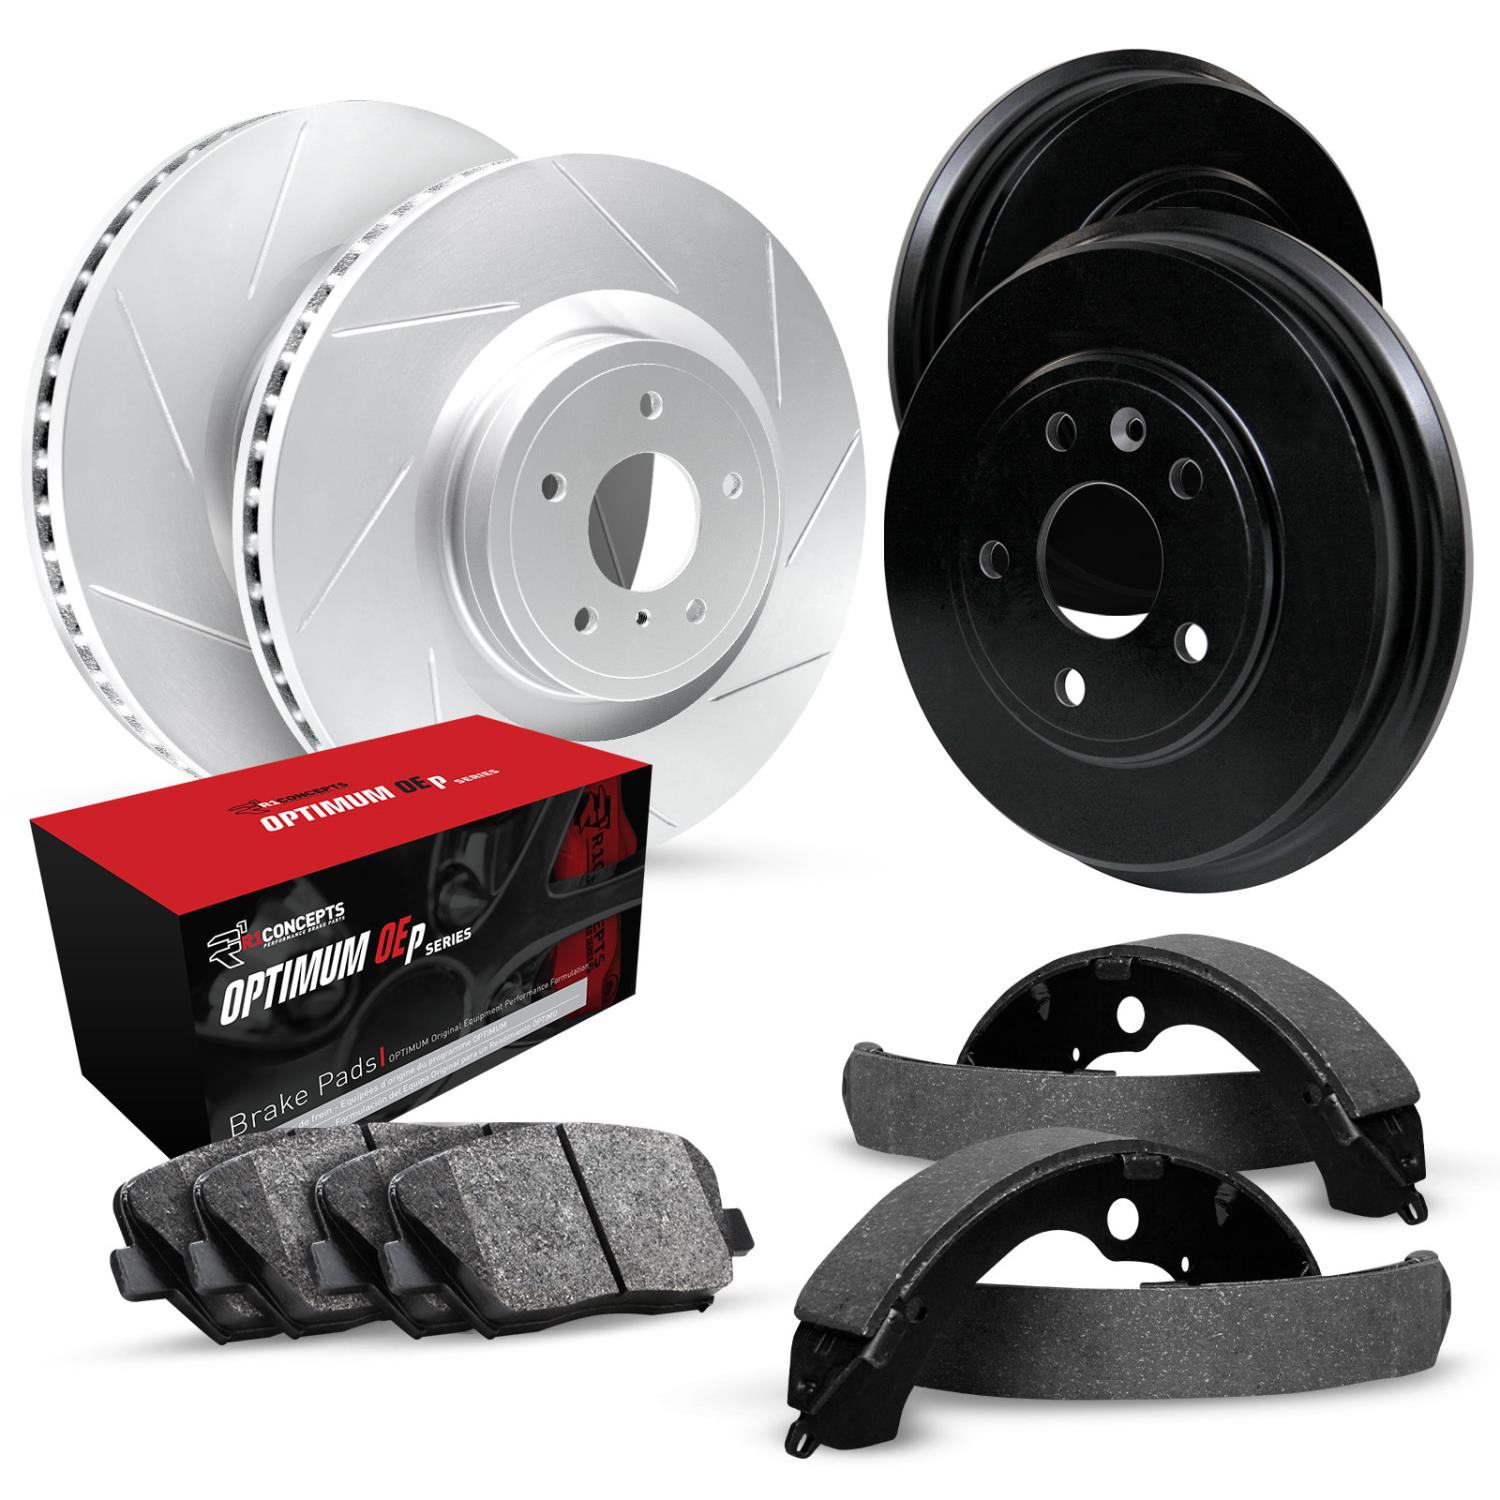 GEO-Carbon Slotted Brake Rotor & Drum Set w/Optimum OE Pads & Shoes, 1992-1993 GM, Position: Front & Rear